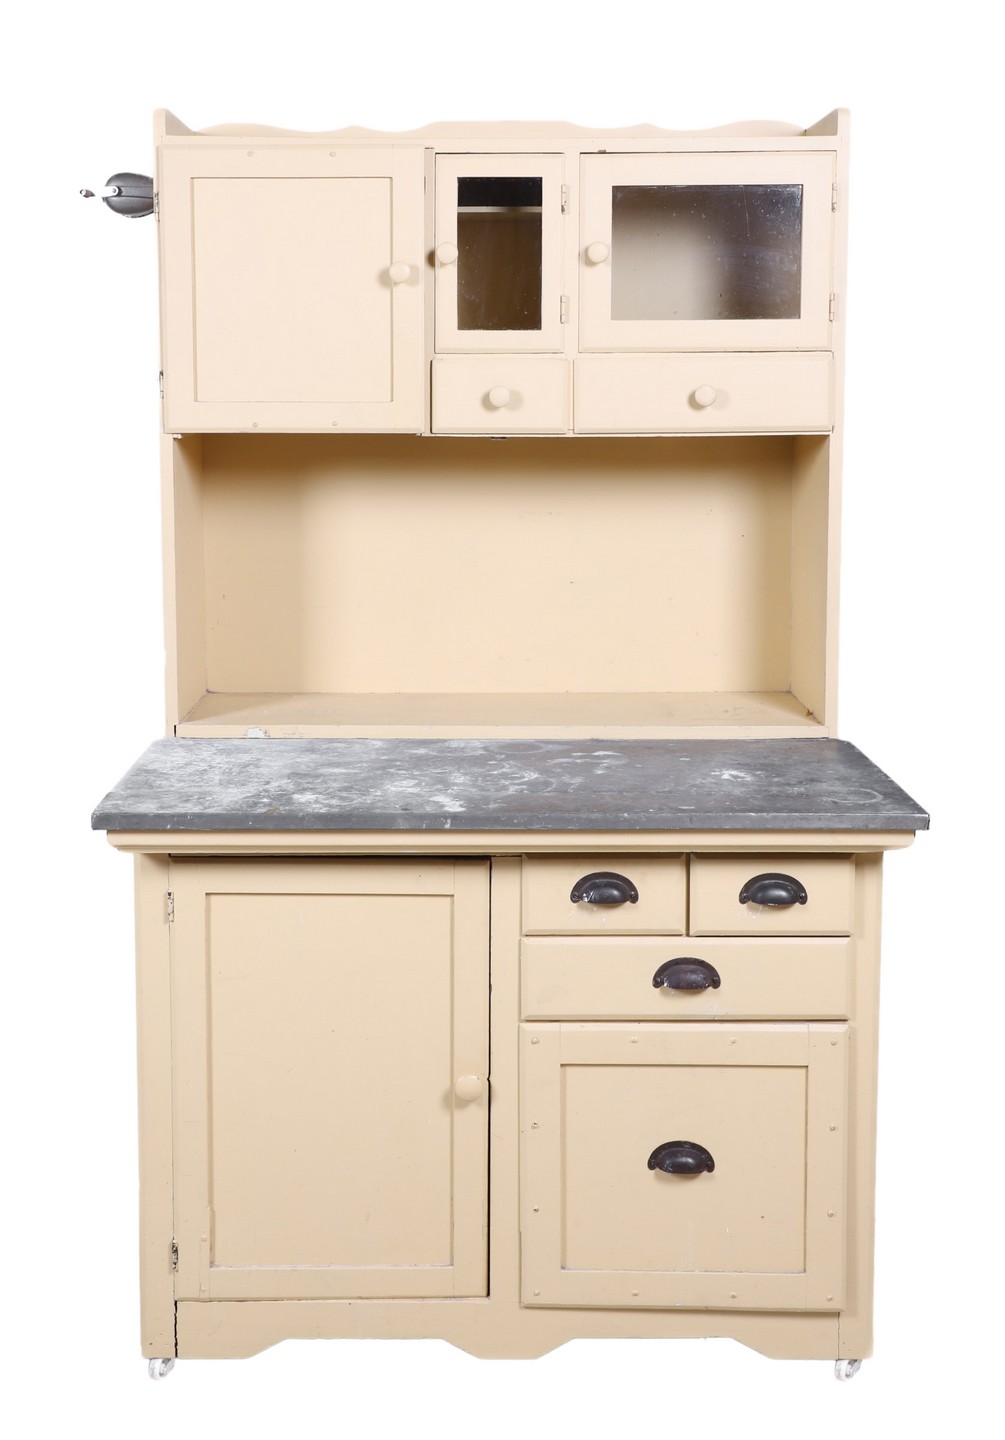 Painted Kitchenette cream painted  27a540